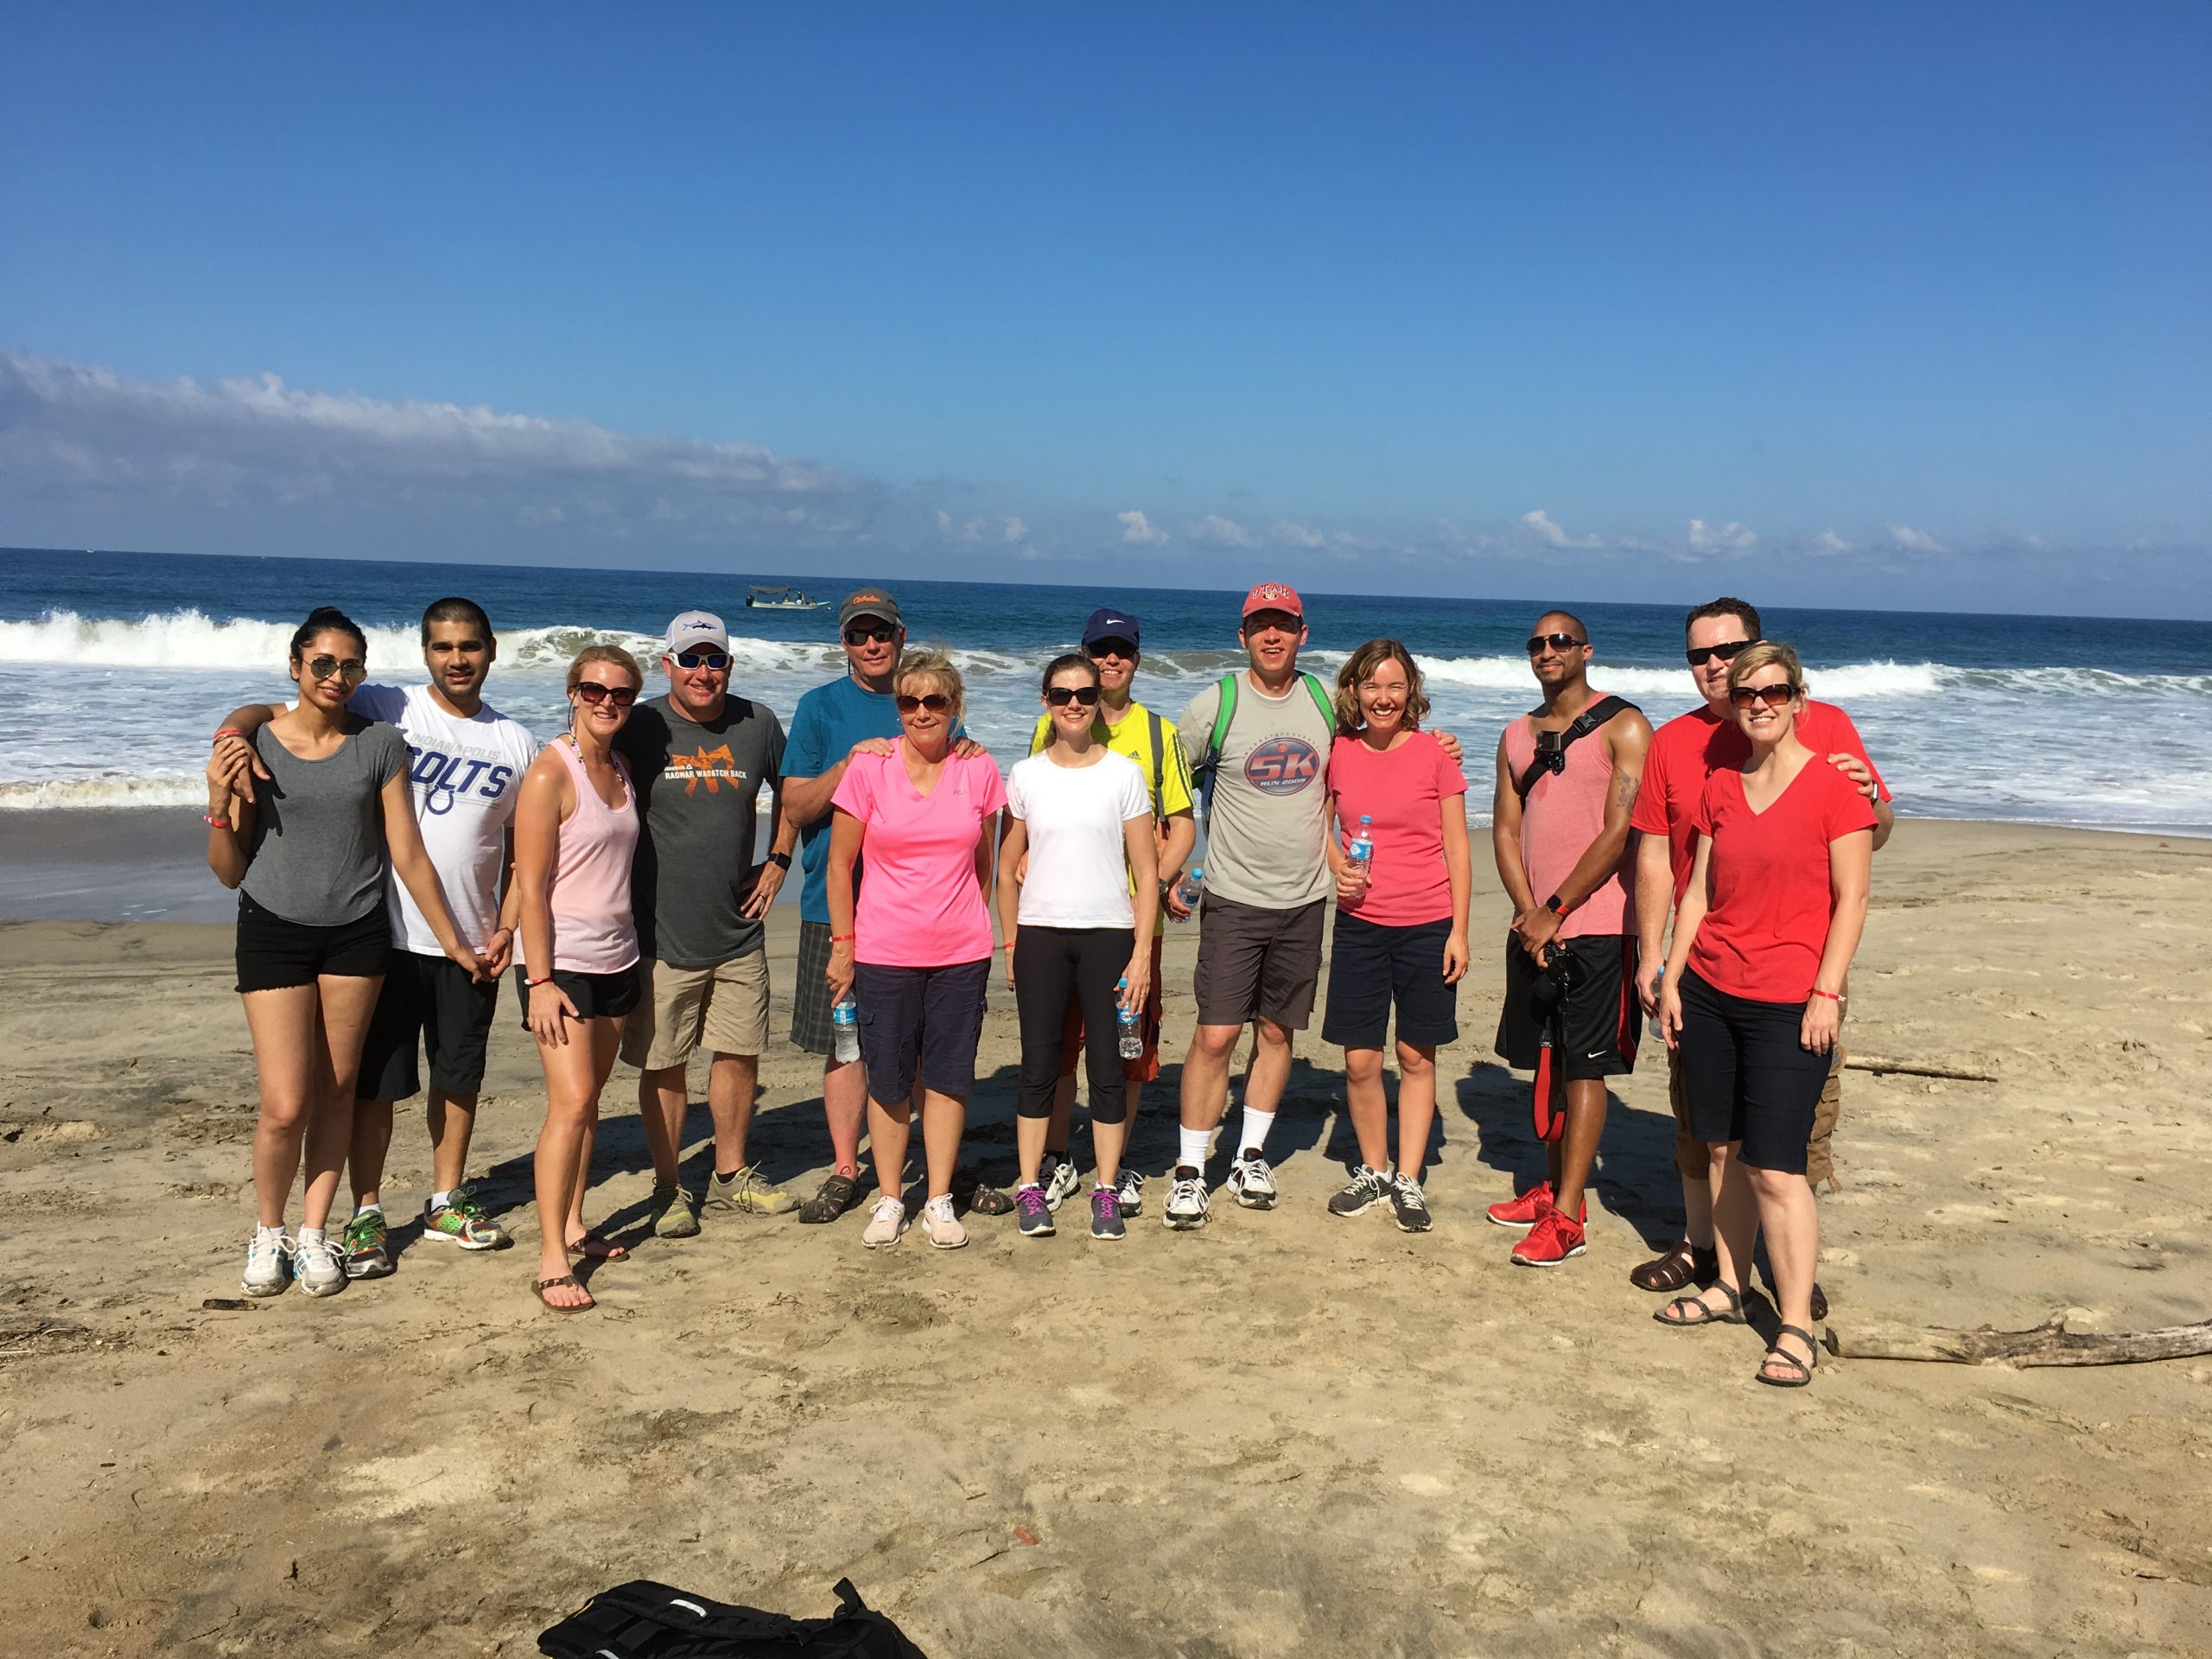 Group of men and women standing and smiling for photo on sandy beach with ocean in the background.